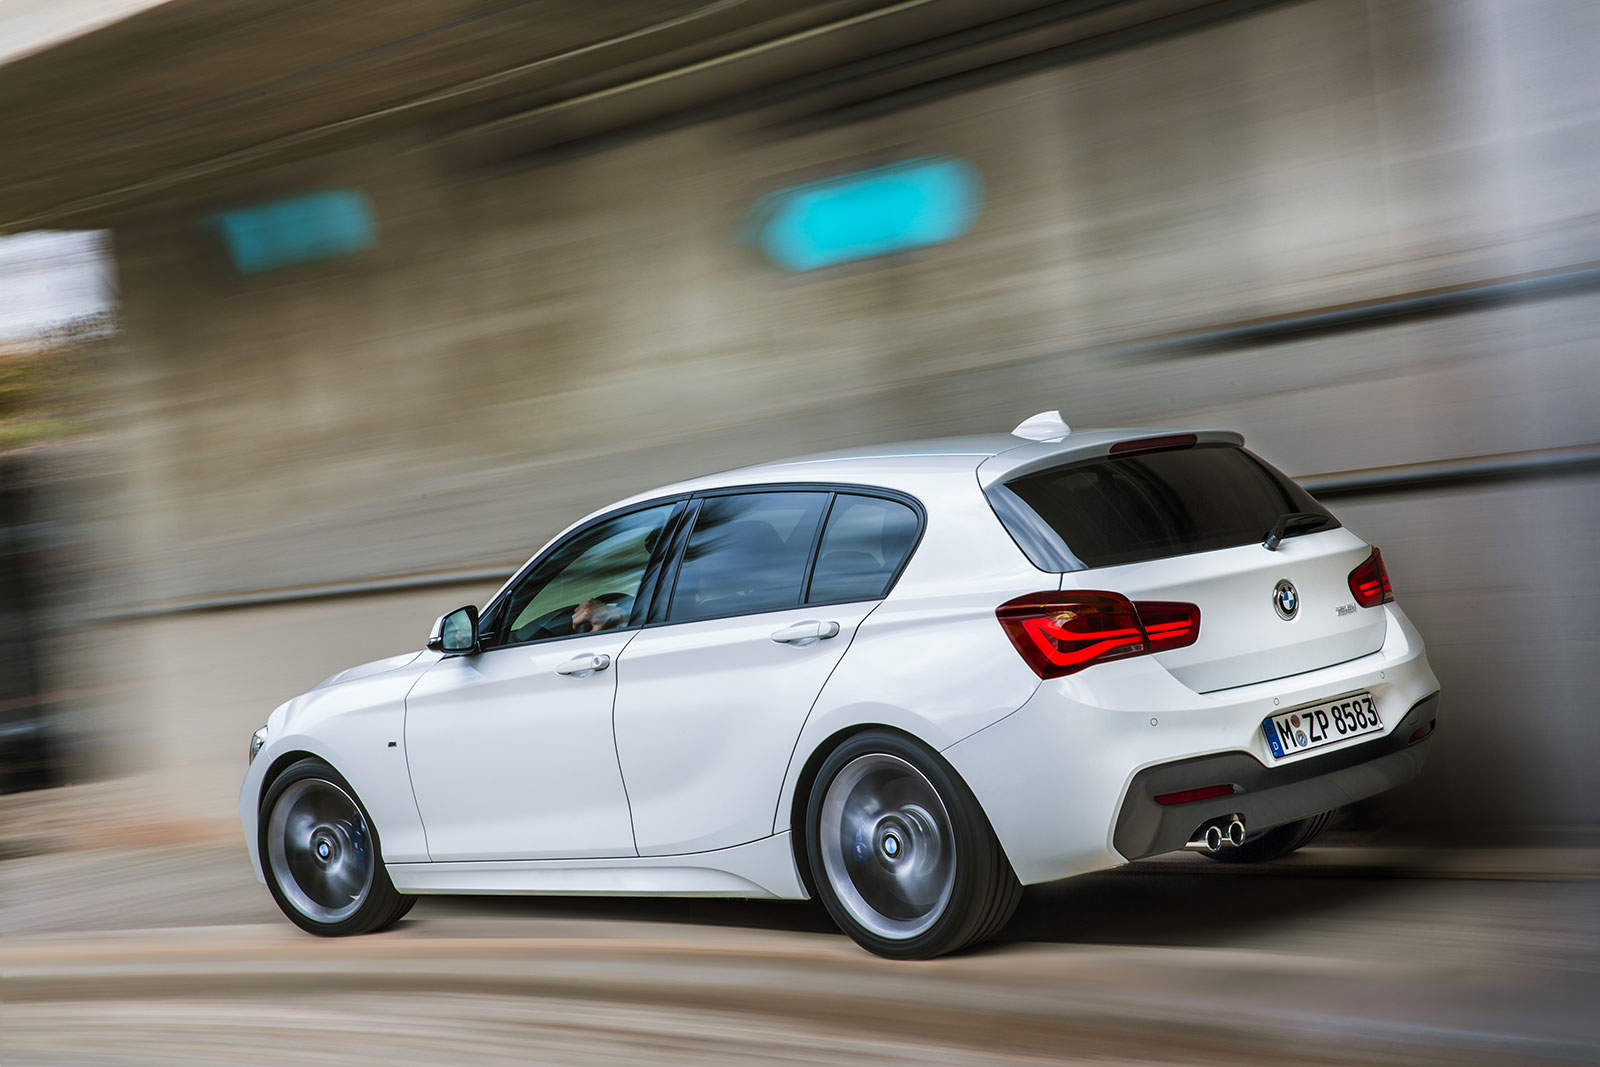 Fichiers Tuning Haute Qualité BMW 1 serie 118i  170hp